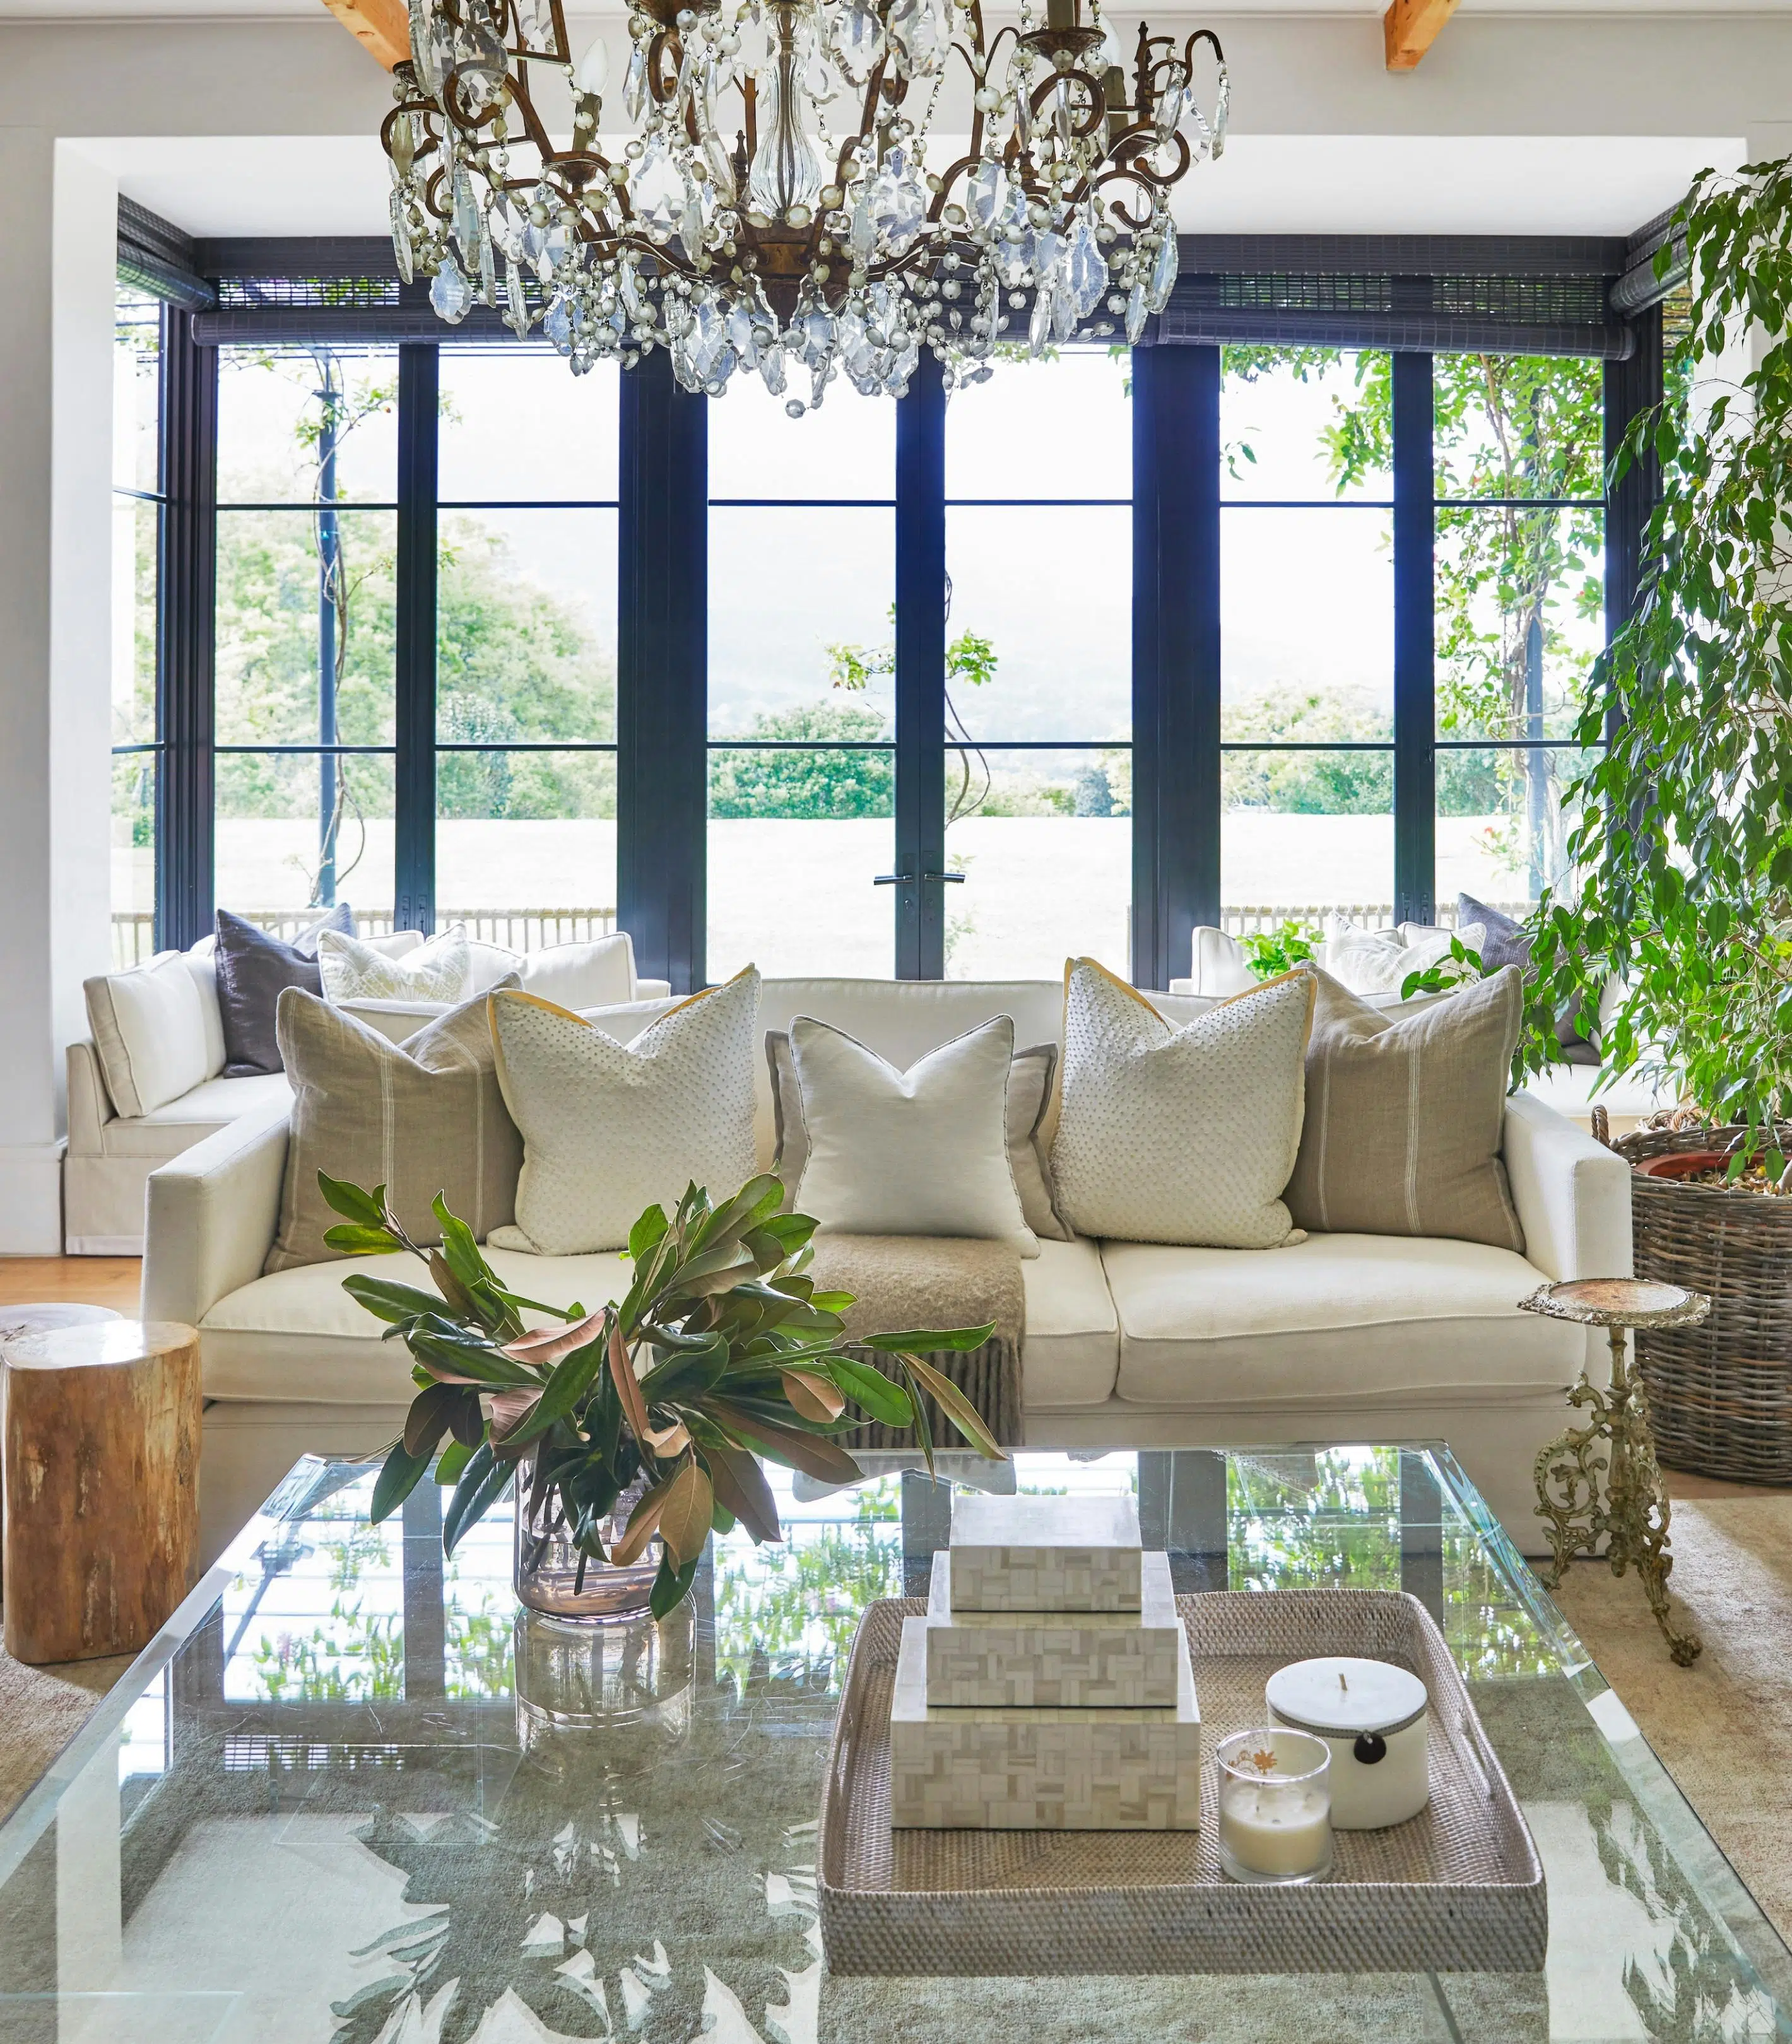 A sitting area features a couch holding cushions, all in neutral tones, and a glass coffee table holding a tray of square objects and a glass vase of greenery. A chandelier hangs above and large glass doors to the garden are visible behind the couch